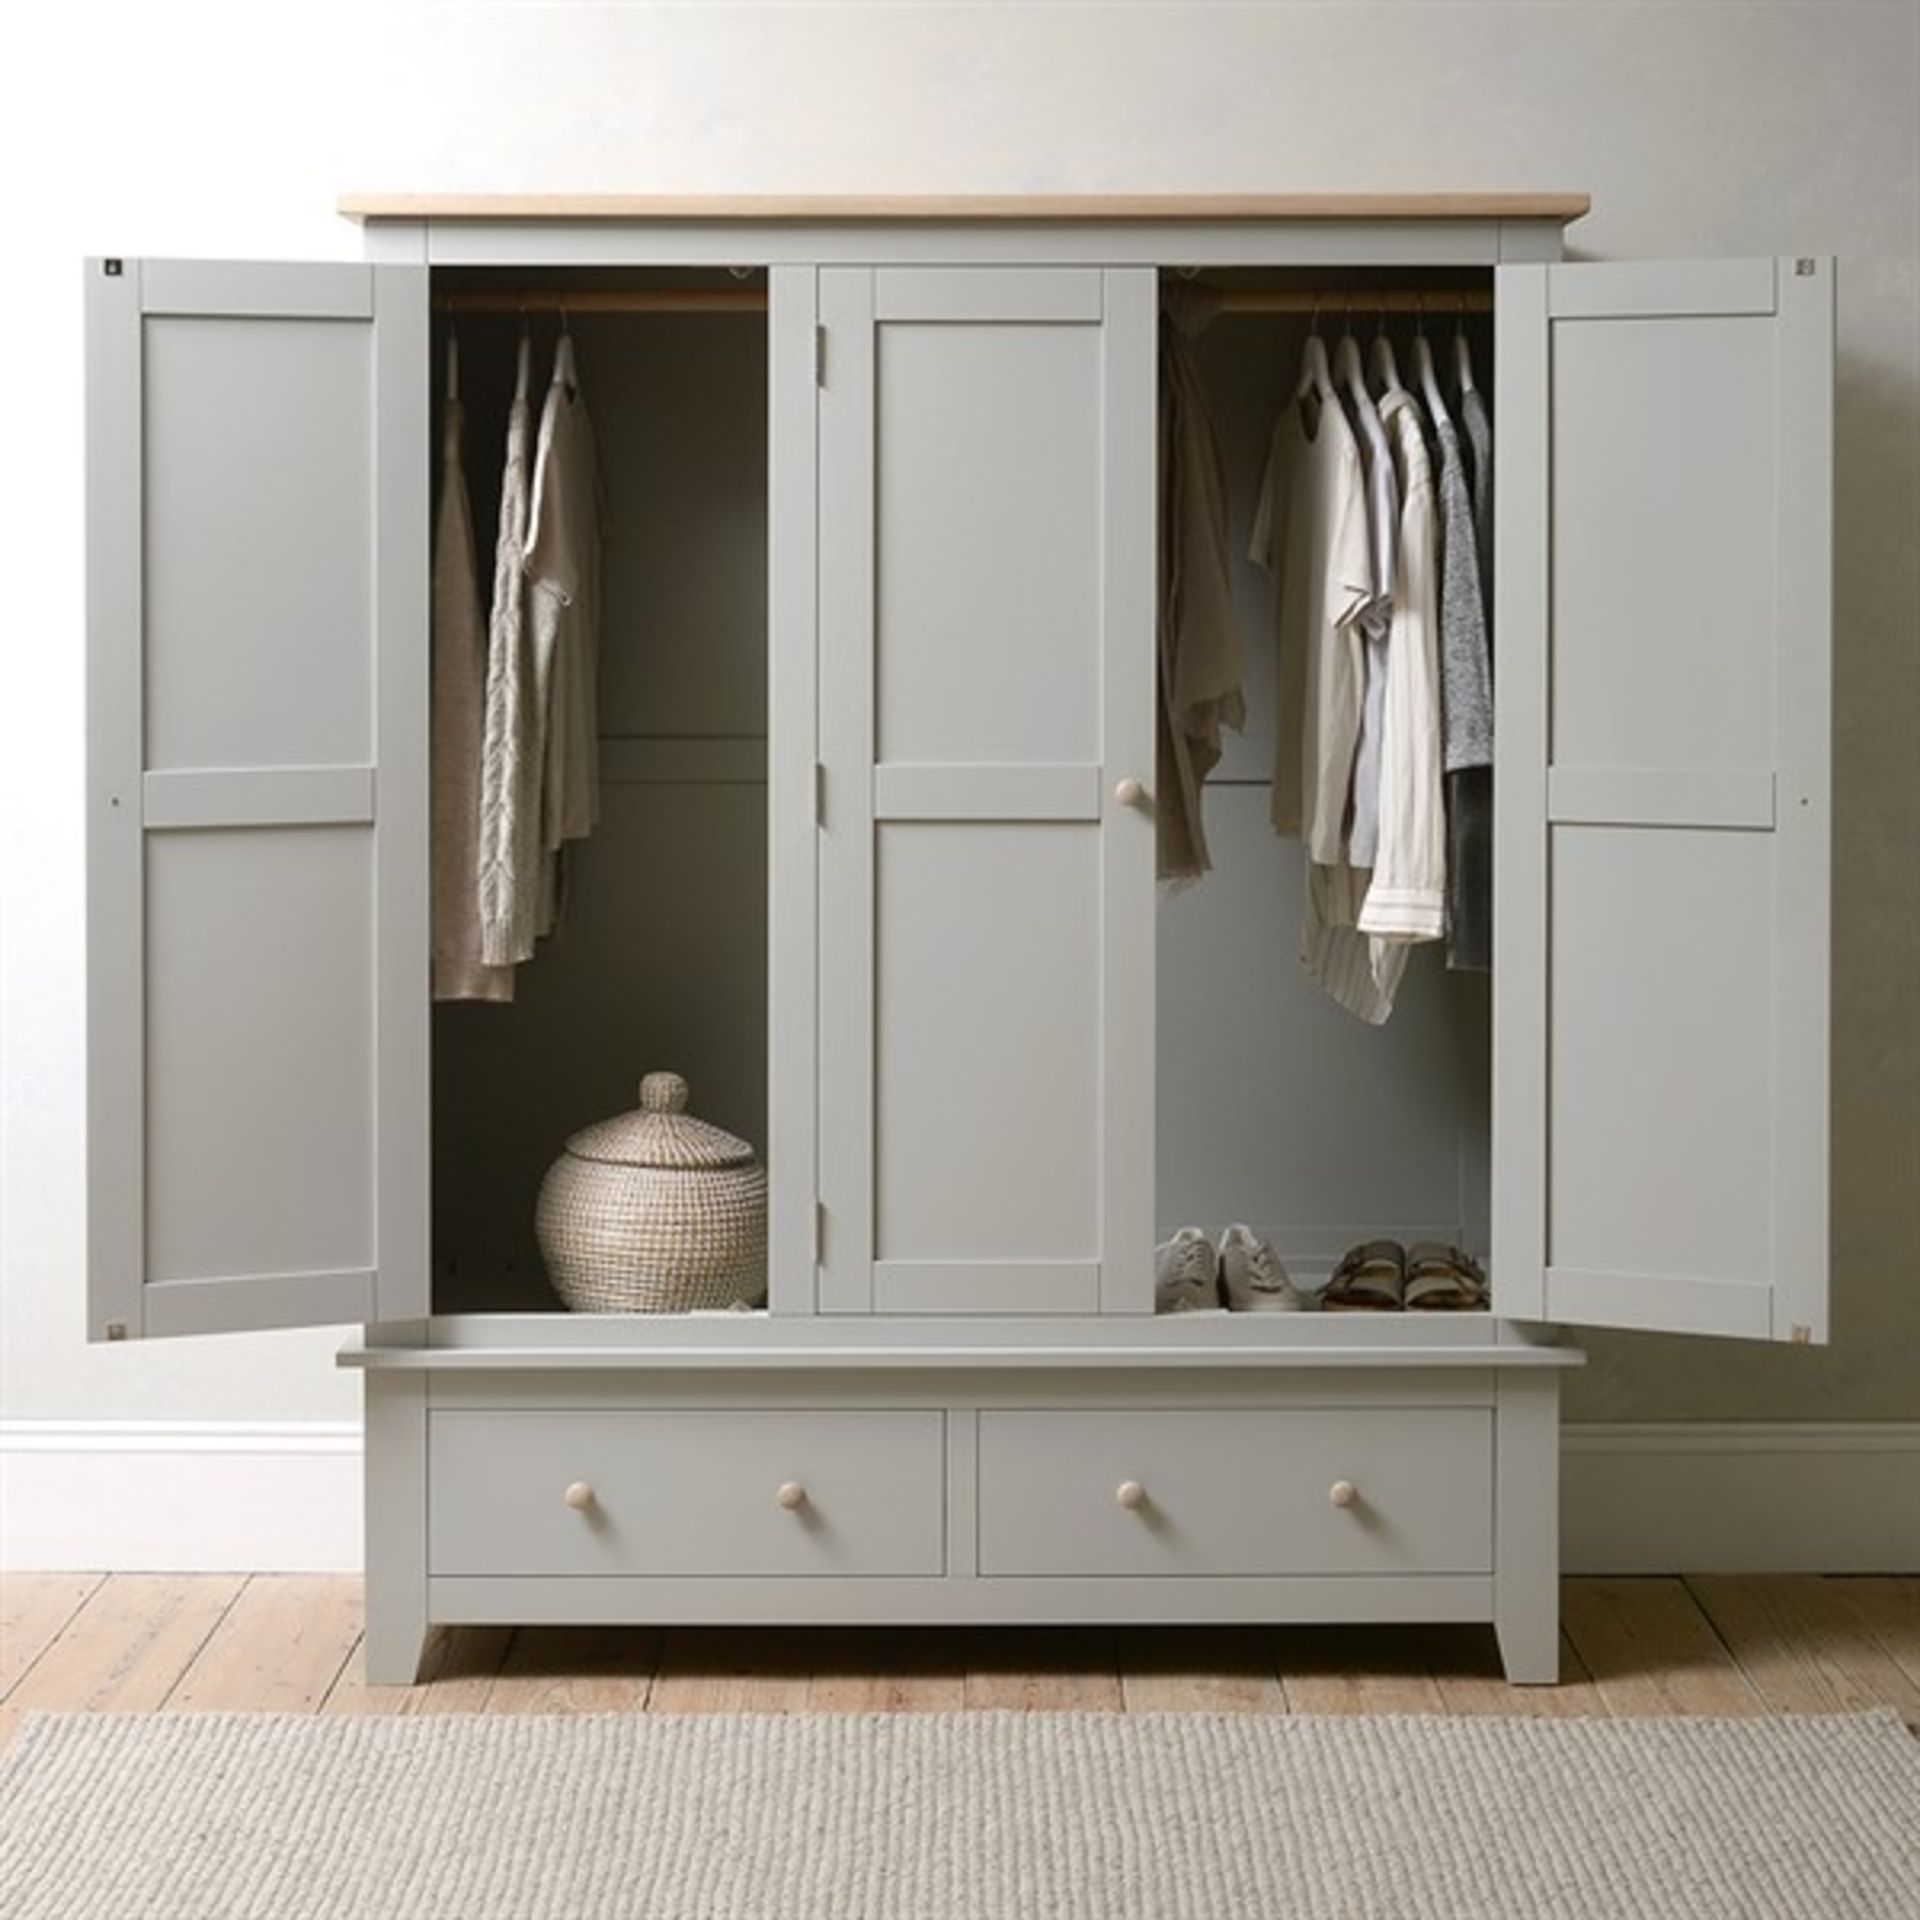 RRP £1255 - Cotswold Company Chester Dove Grey Triple Wardrobe (H) 193 x (W) 157 x (D) 58 cm - BOXES - Image 2 of 5